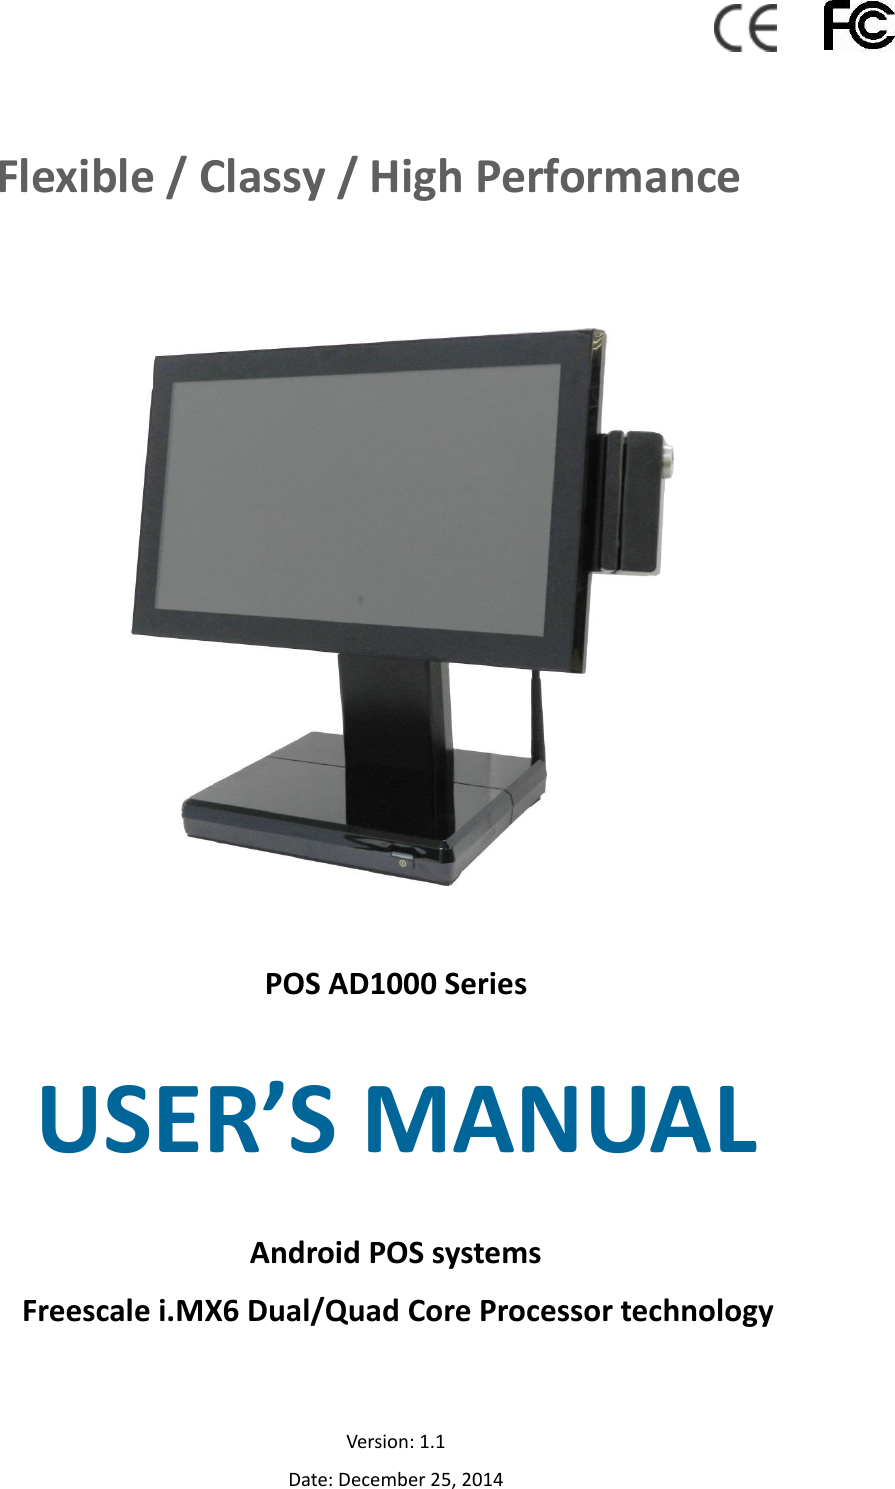                       Flexible / Classy / High Performance                                POS AD1000 Series                     USER’S MANUAL  Android POS systems               Freescale i.MX6 Dual/Quad Core Processor technology        Version: 1.1 Date: December 25, 2014 